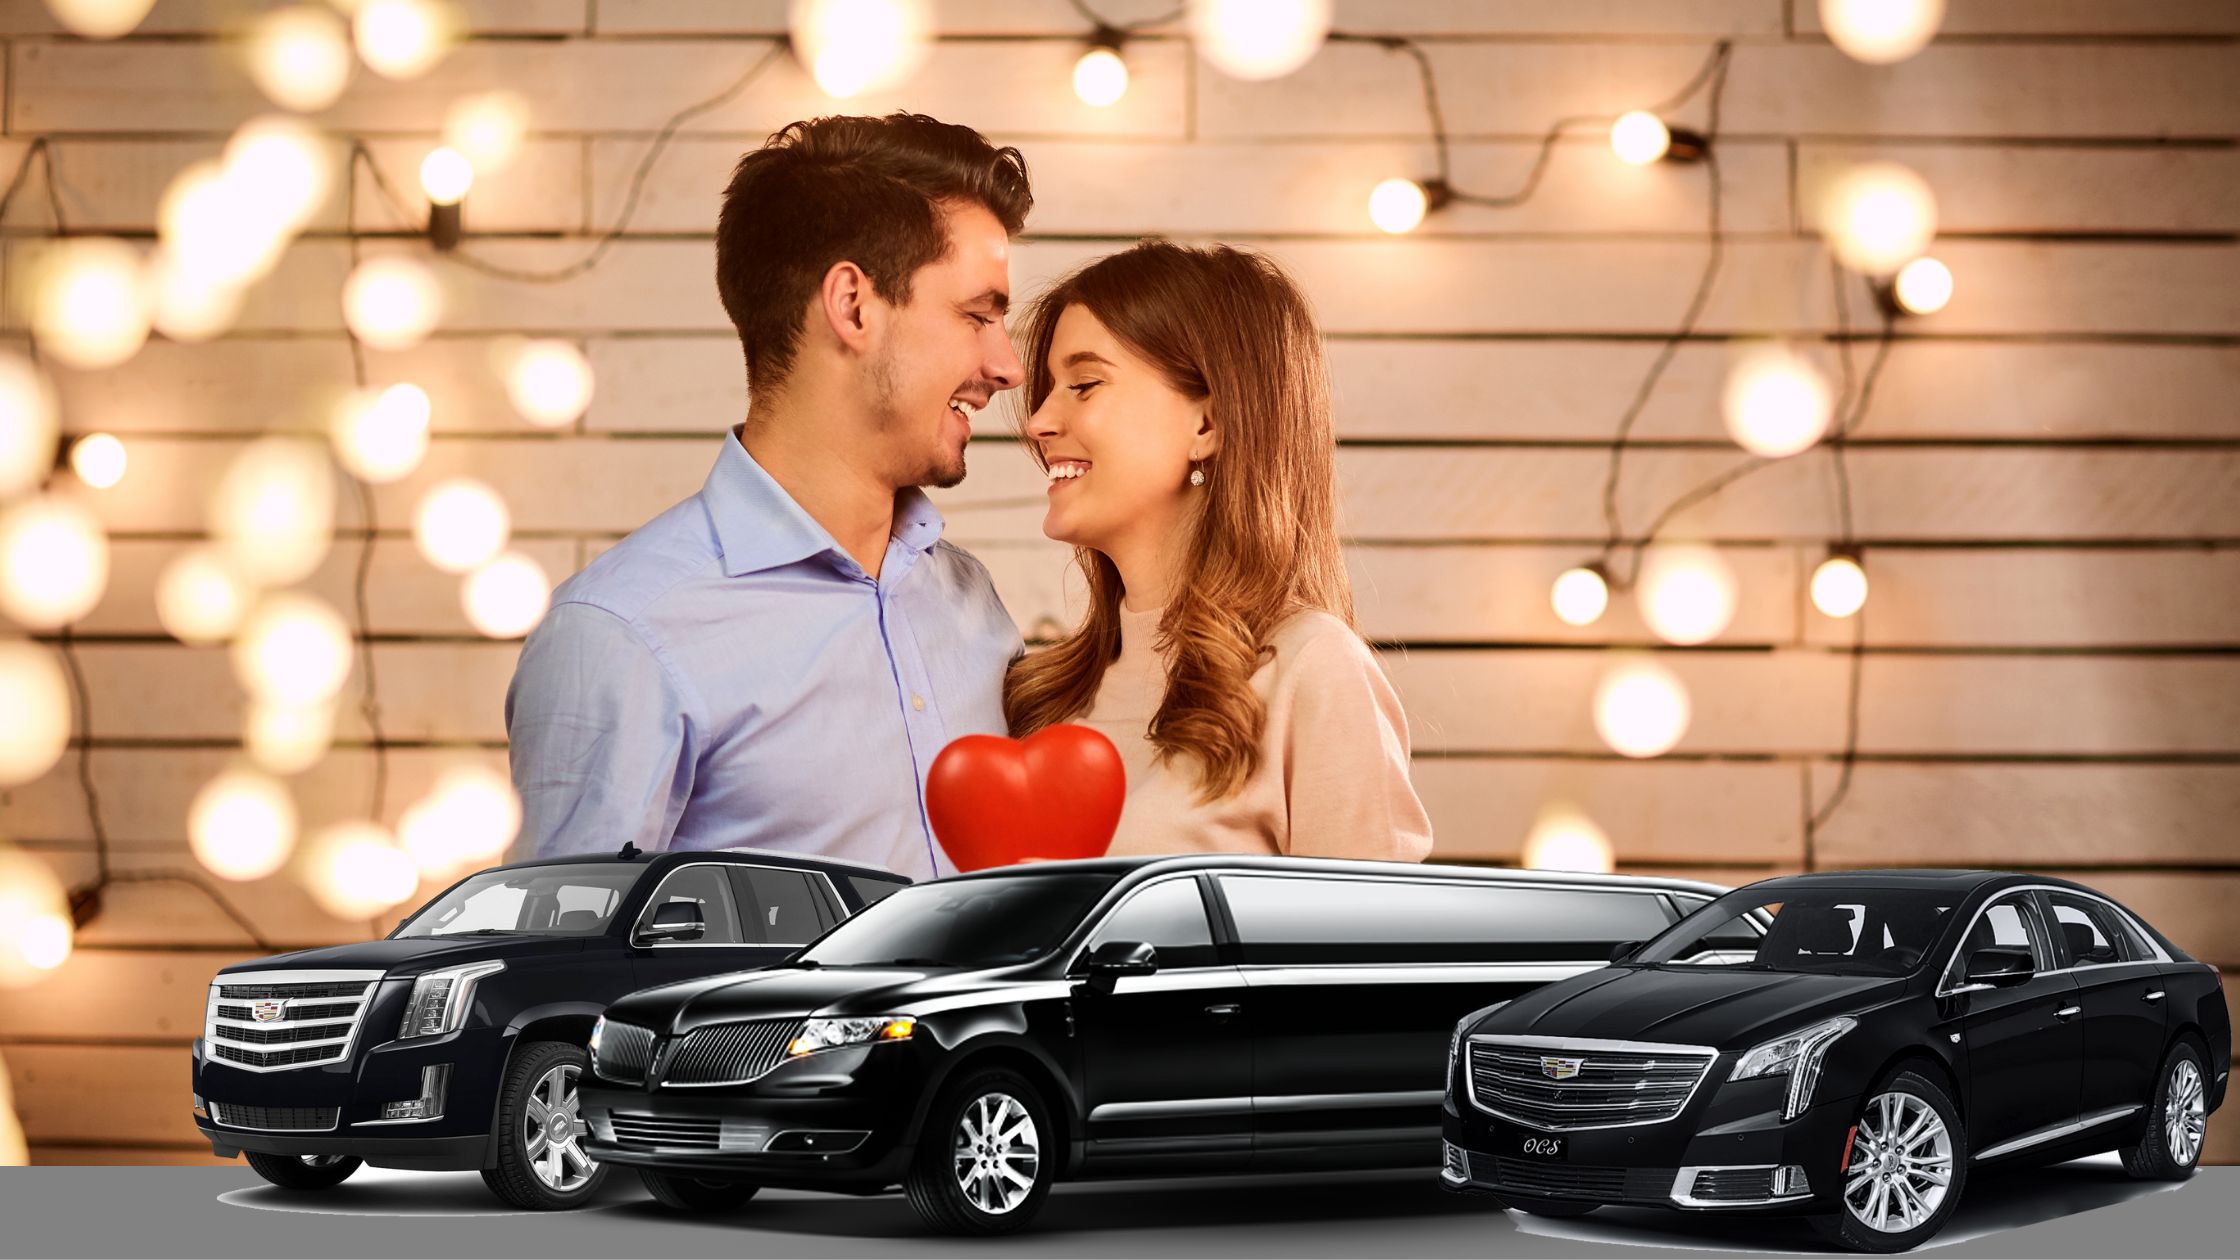 Valentine’s Day Limo Service in Long Island – Book Romantic Wine Tours & More